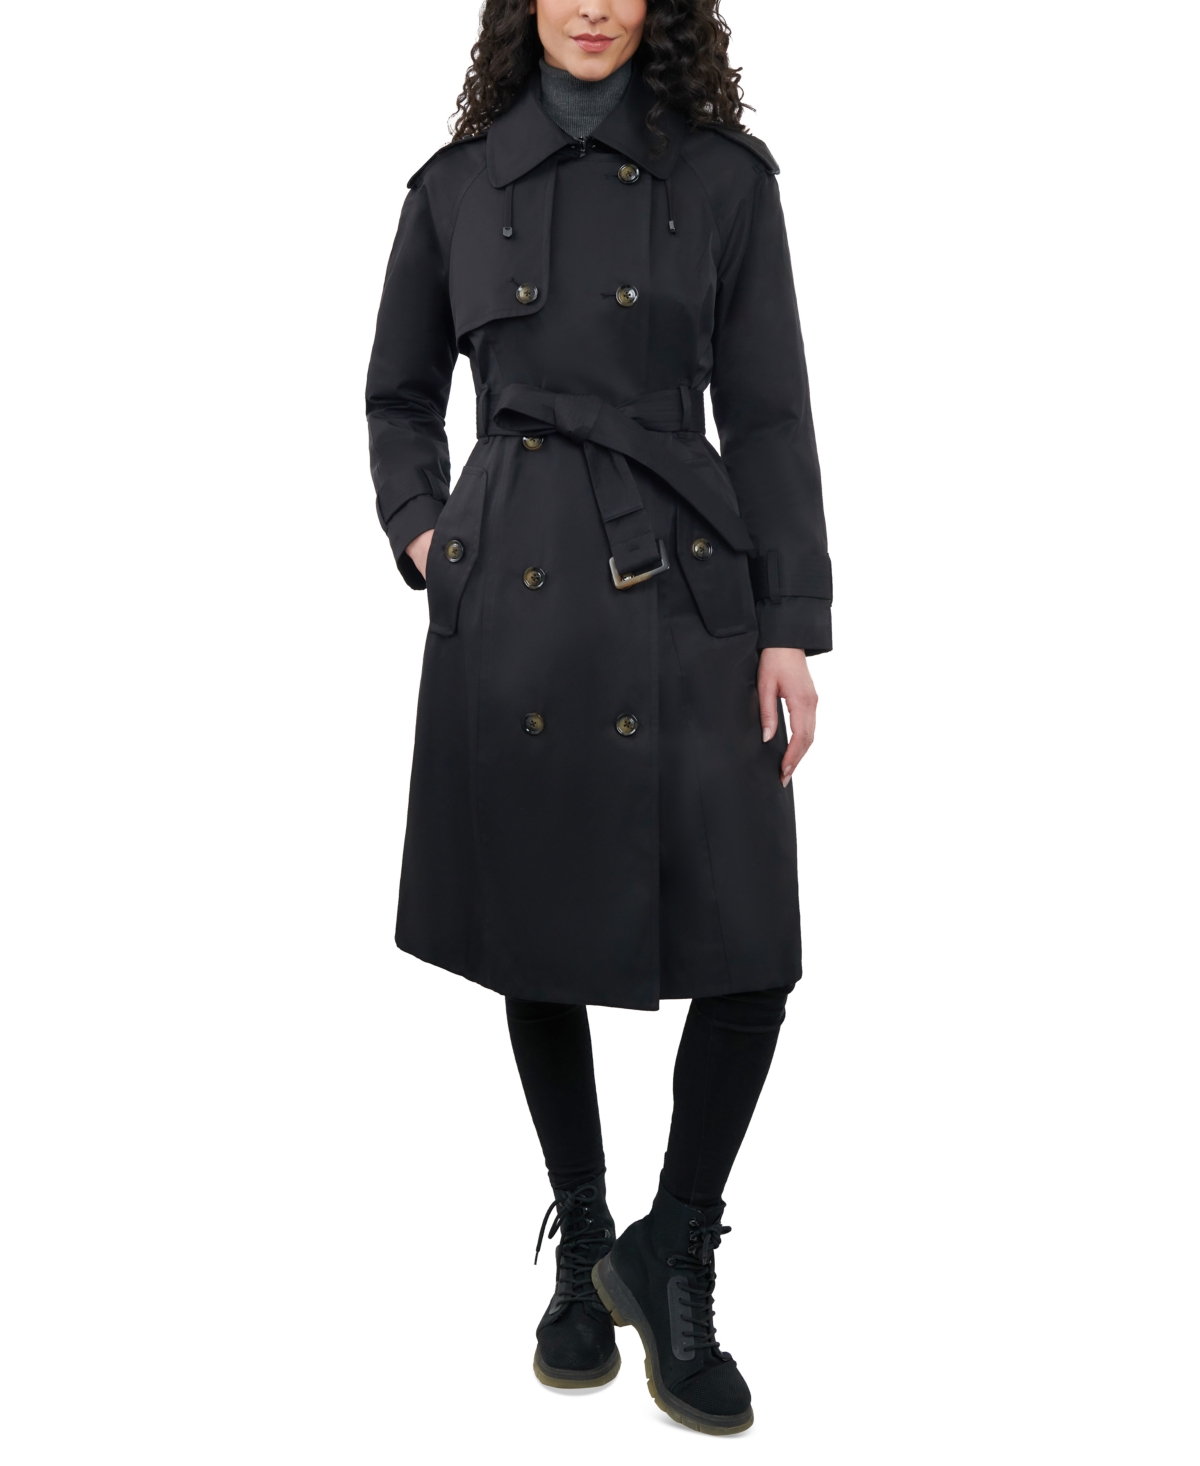 London Fog Women's 42" Double-Breasted Hooded Trench Coat